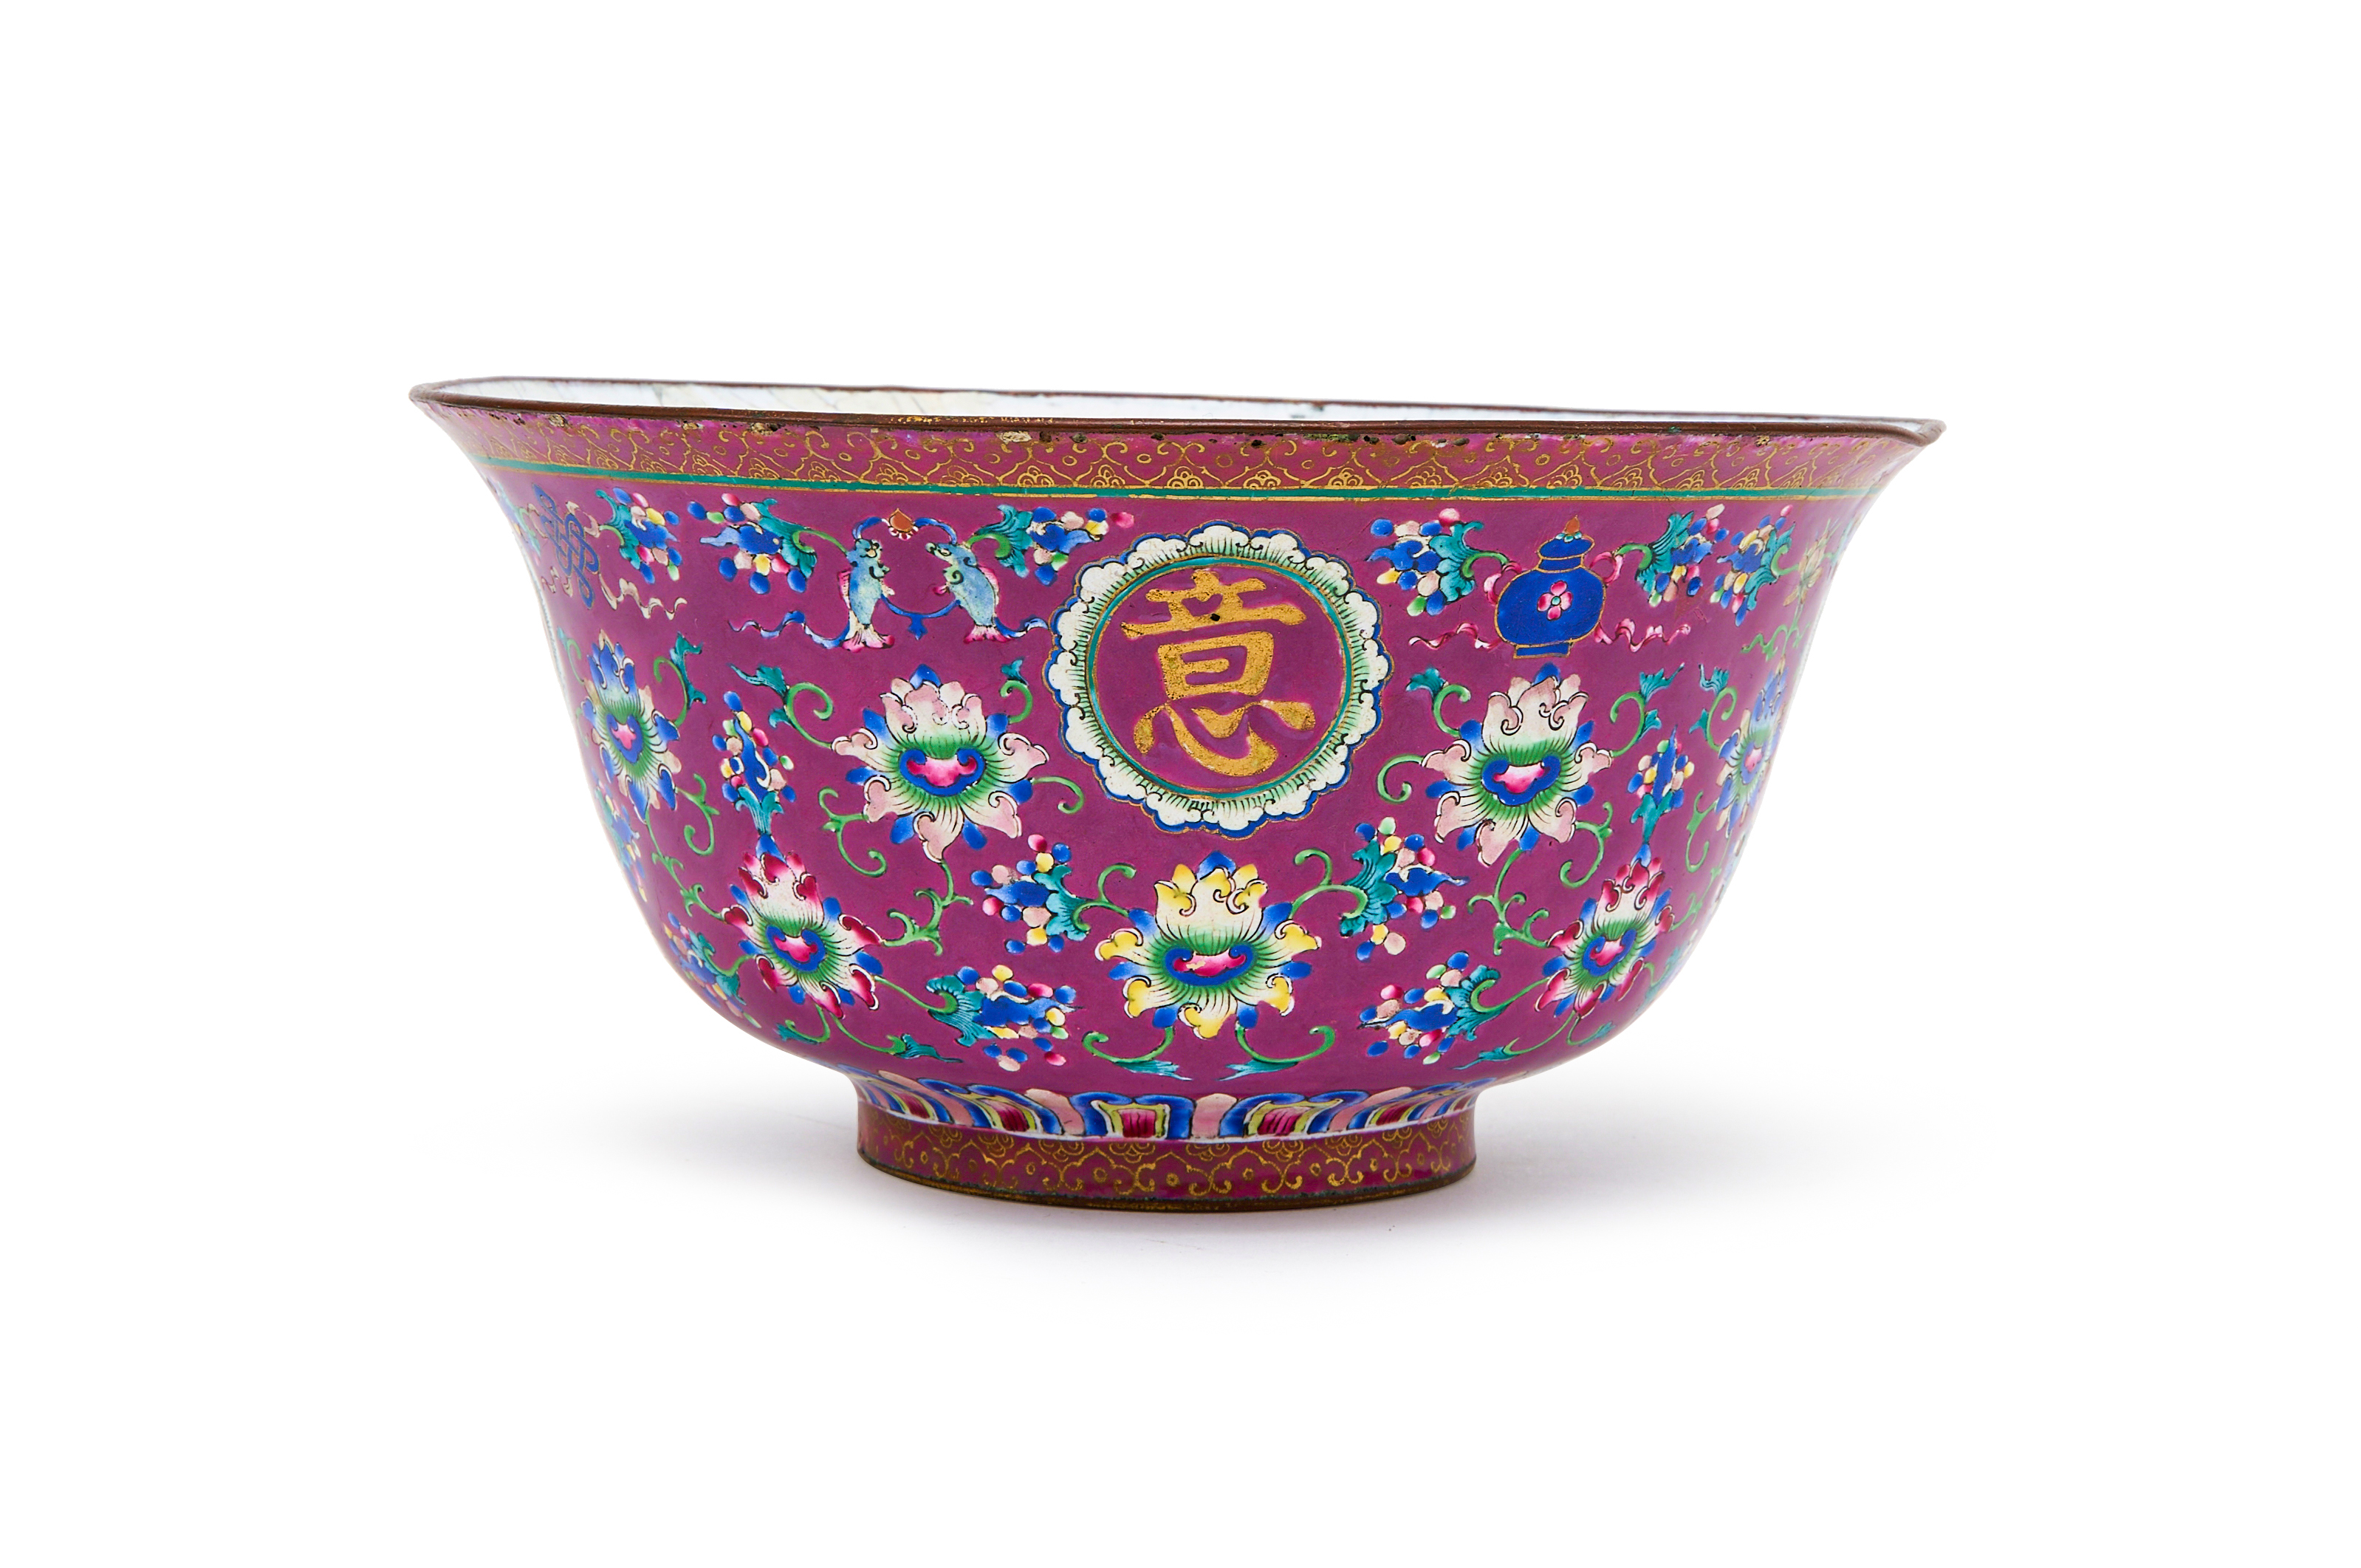 A CHINESE PURPLE GROUND INSCRIBED CANTON ENAMEL BOWL, QIANLONG PERIOD (1736-1795) - Image 3 of 7